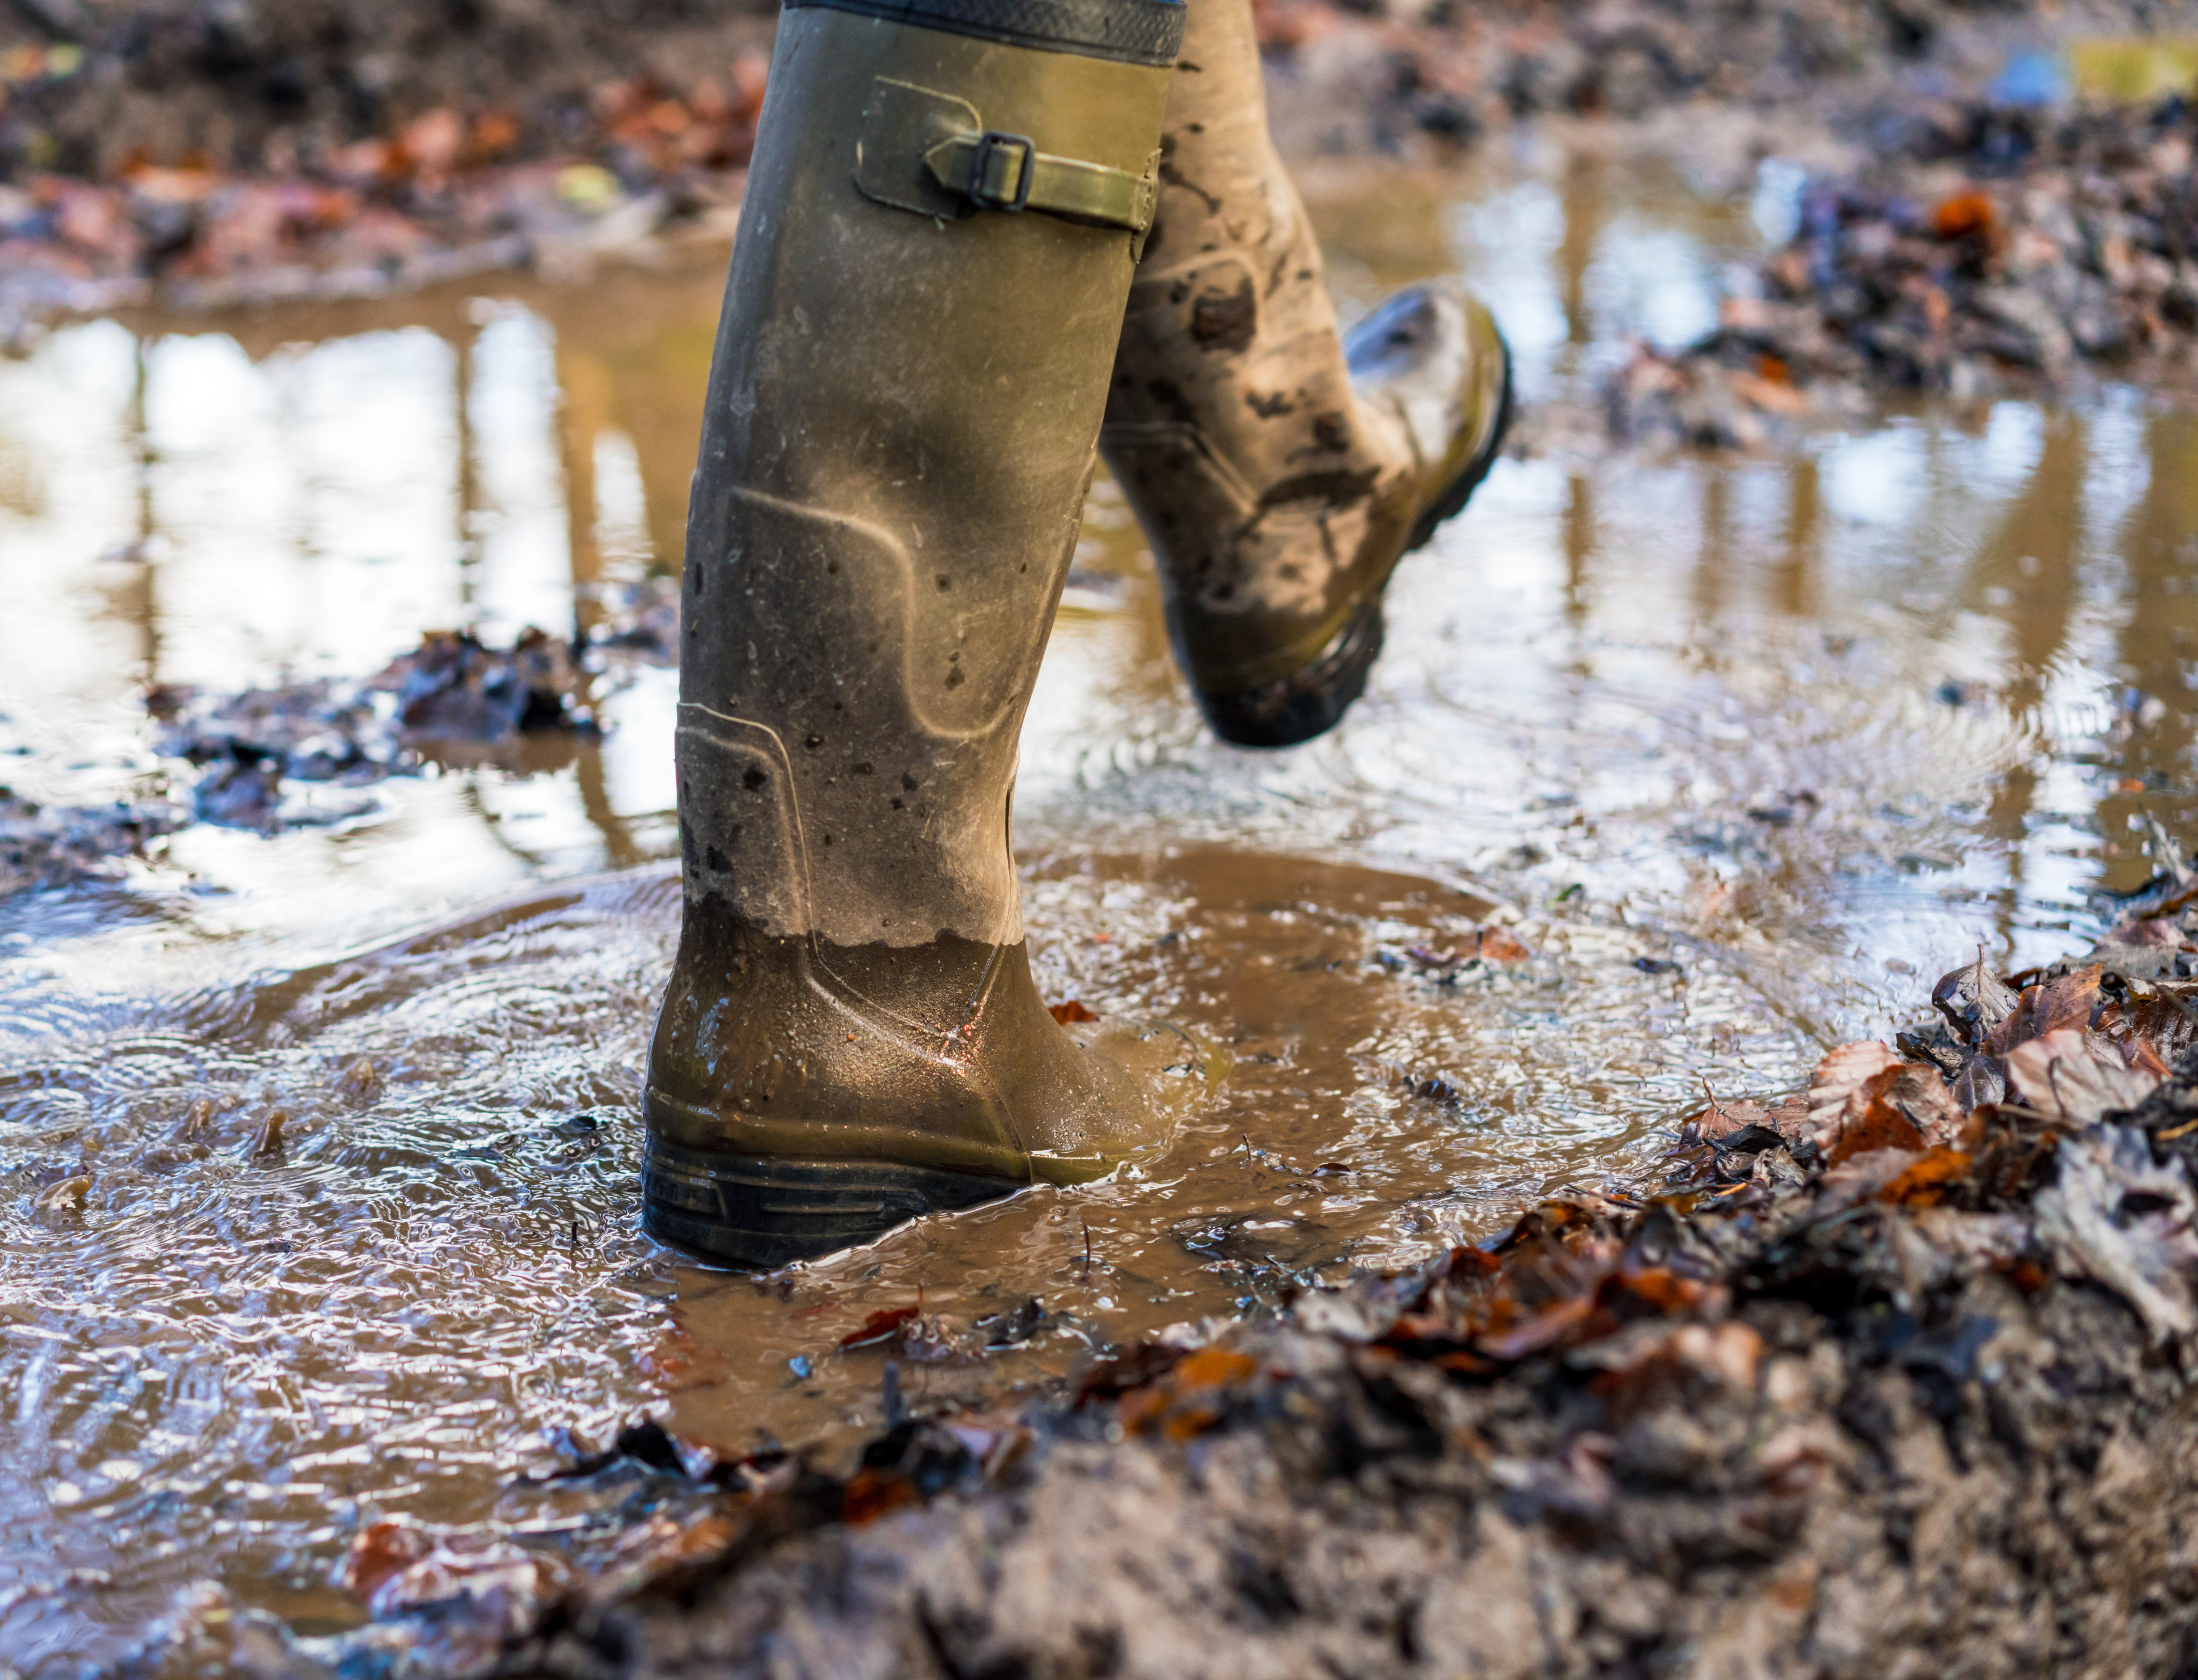 Close-up on a pair of feet protected by welly boots as their owner steps enthusiastically through a muddy puddle. Getty Images